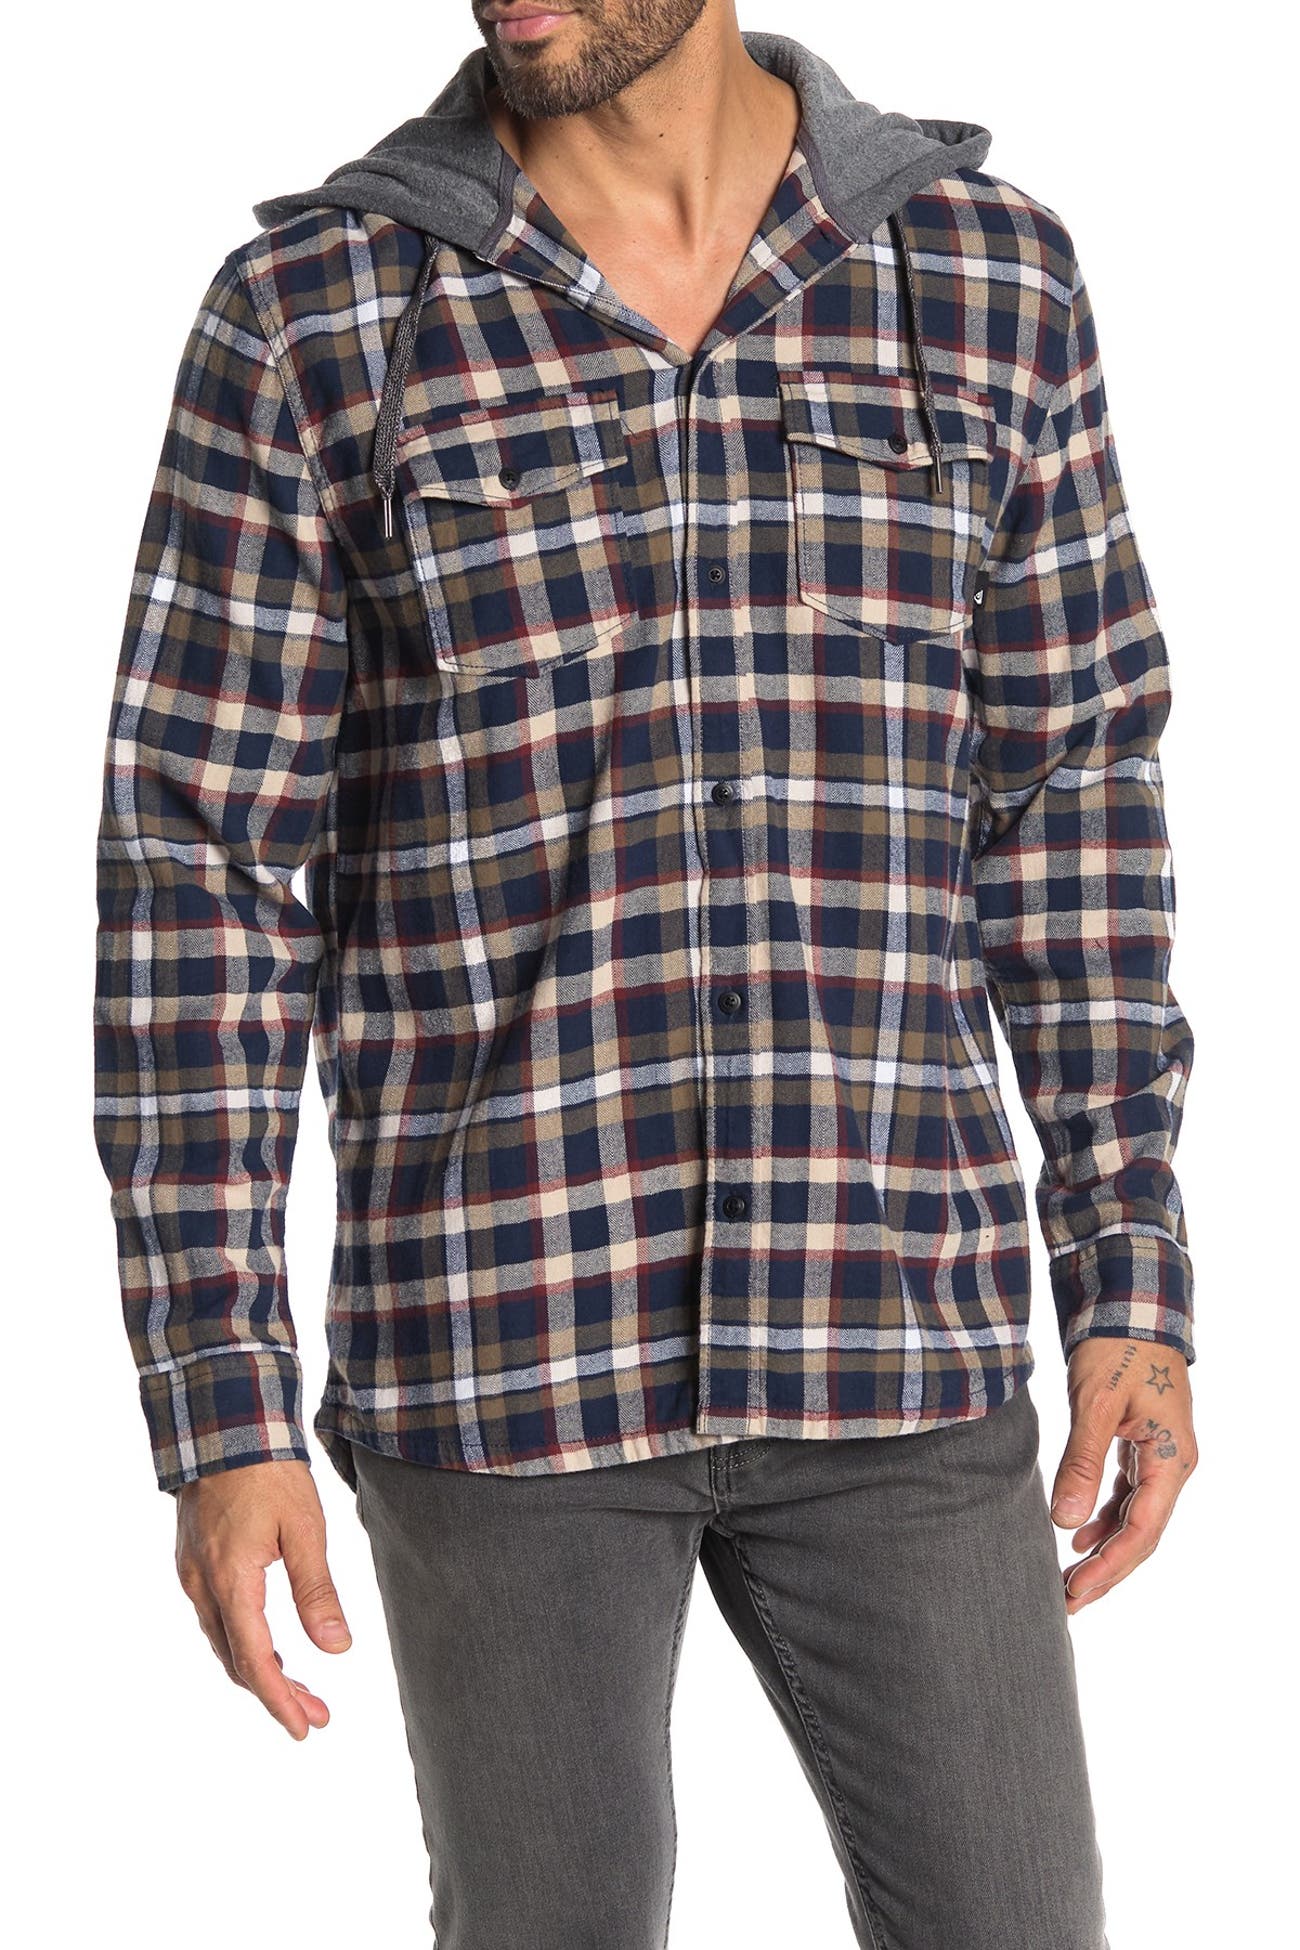 Quiksilver | Snap Up Checkered Jacket | Nordstrom Rack